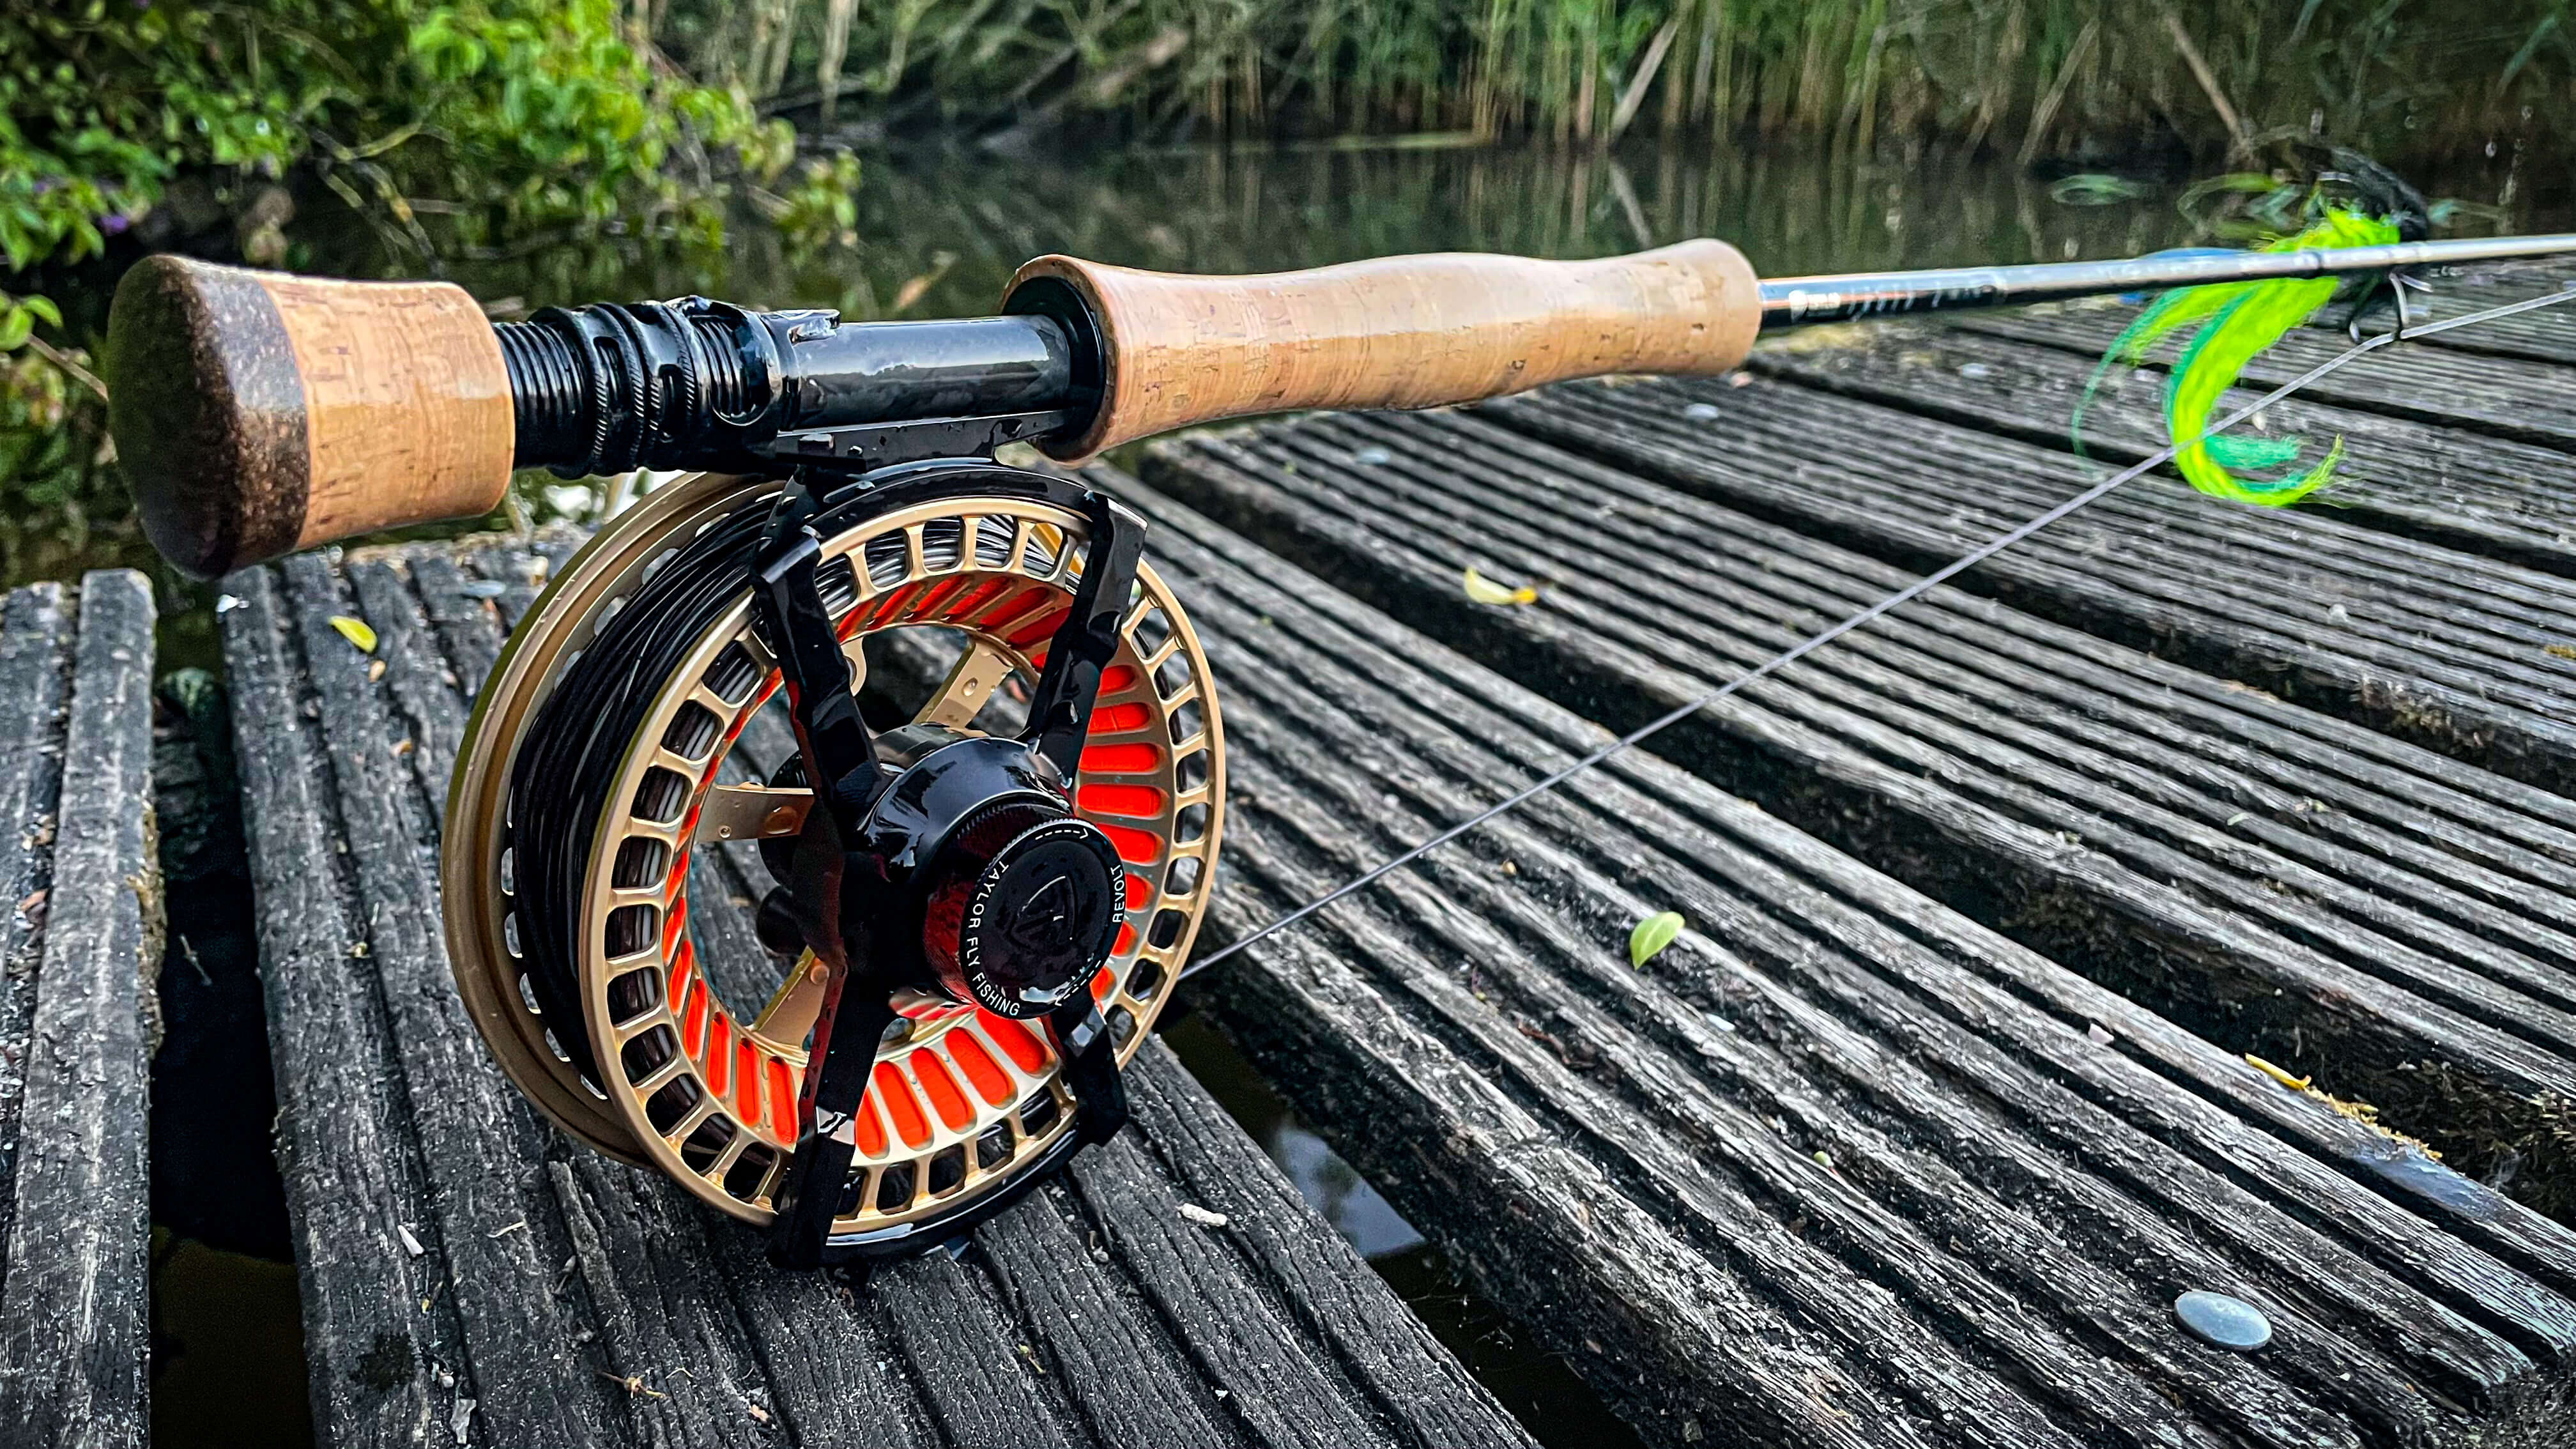 Finding the right reel, EsoxOnly